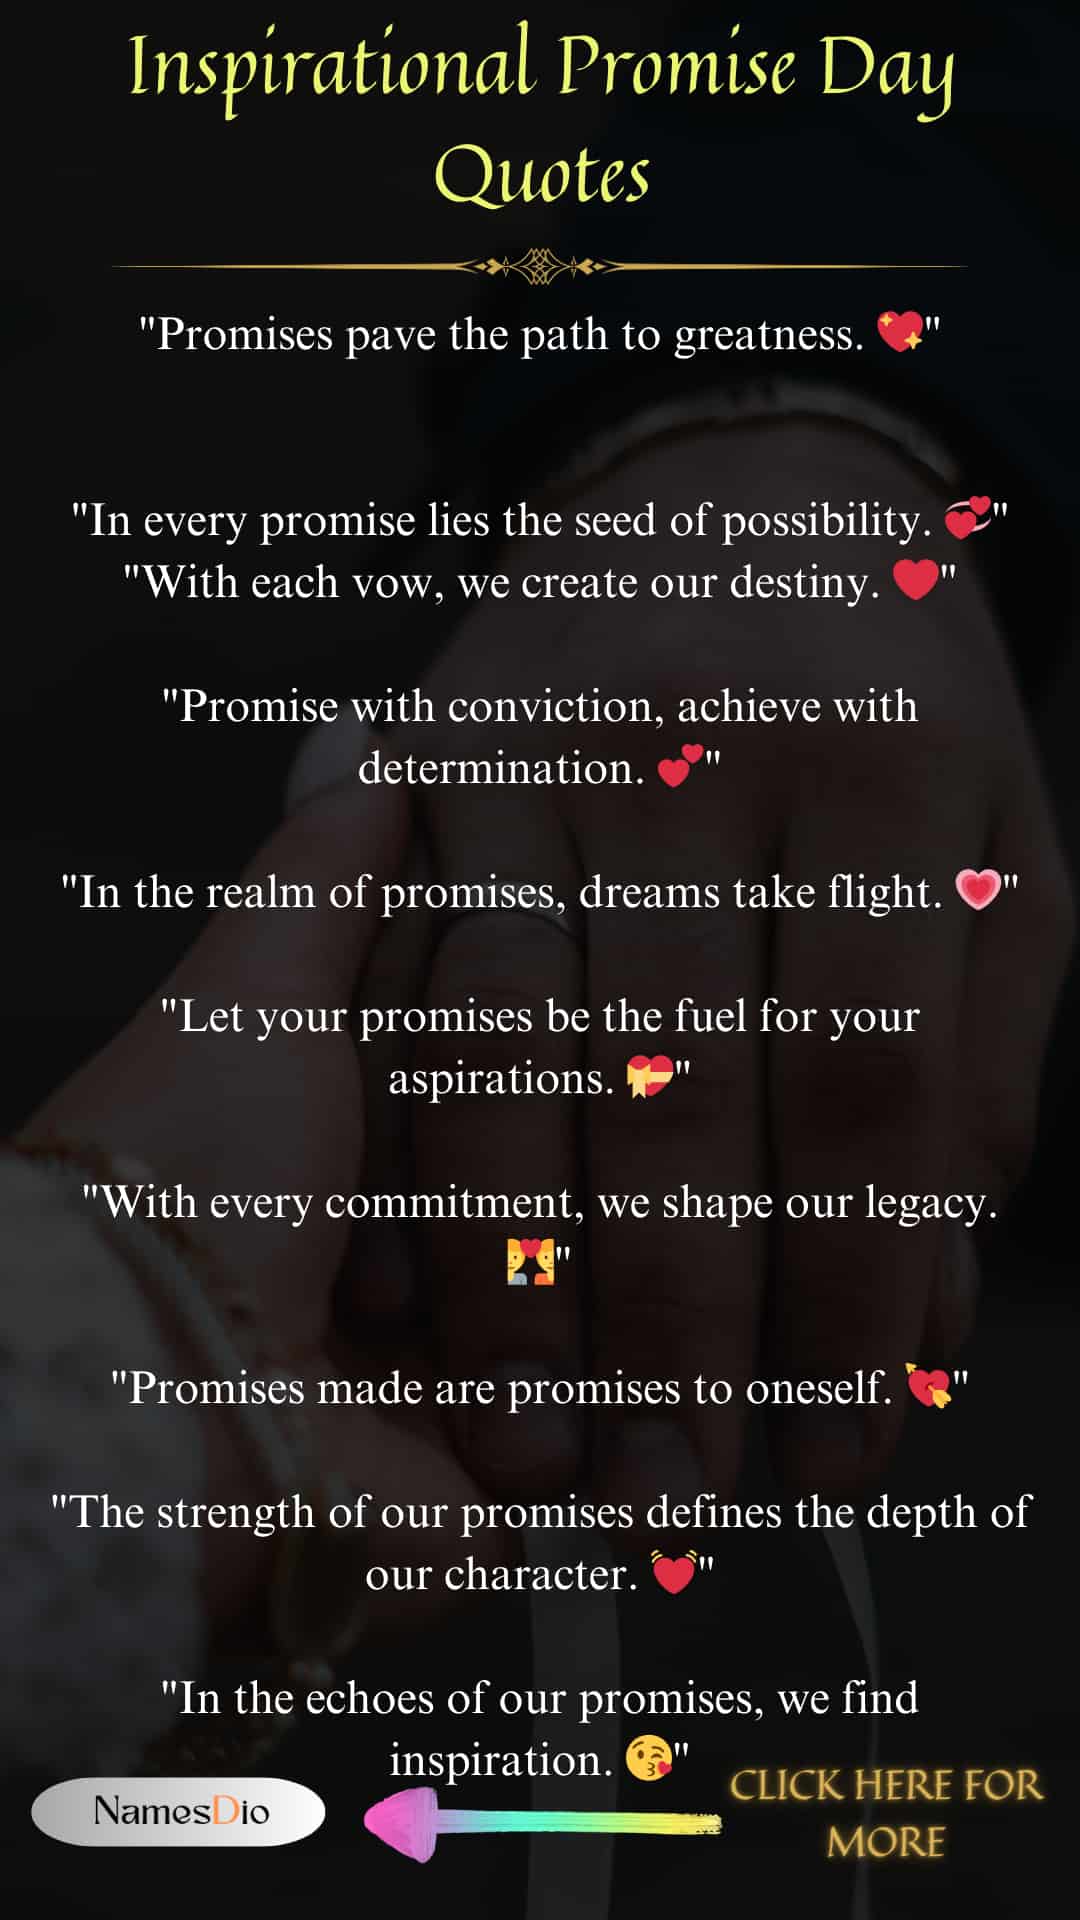 Inspirational-Promise-Day-Quotes